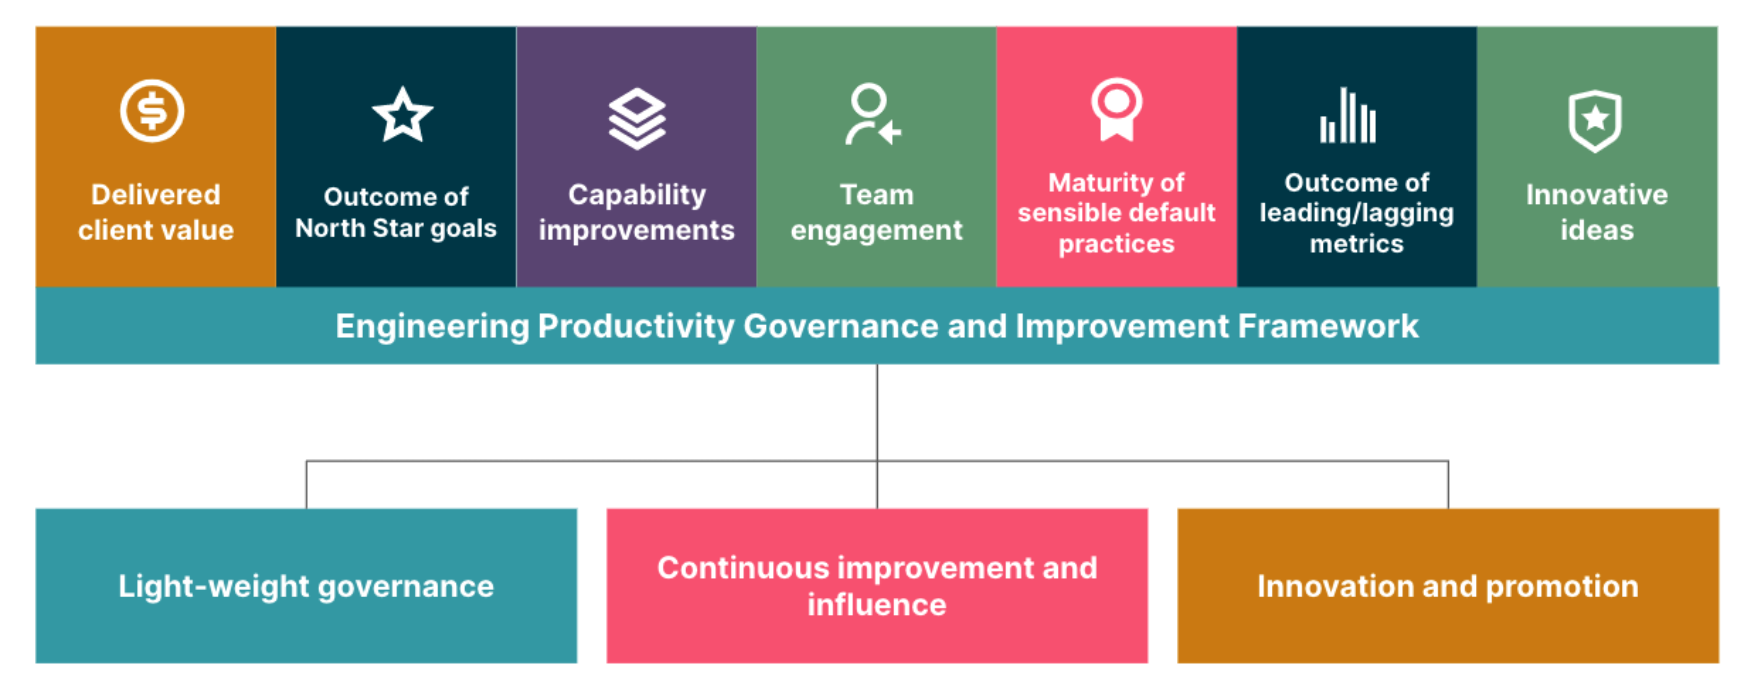 This diagram summarises the different ways of measuring the improvement of engineering productivity with the aim of ensuring that you are doing the right things and doing things right.